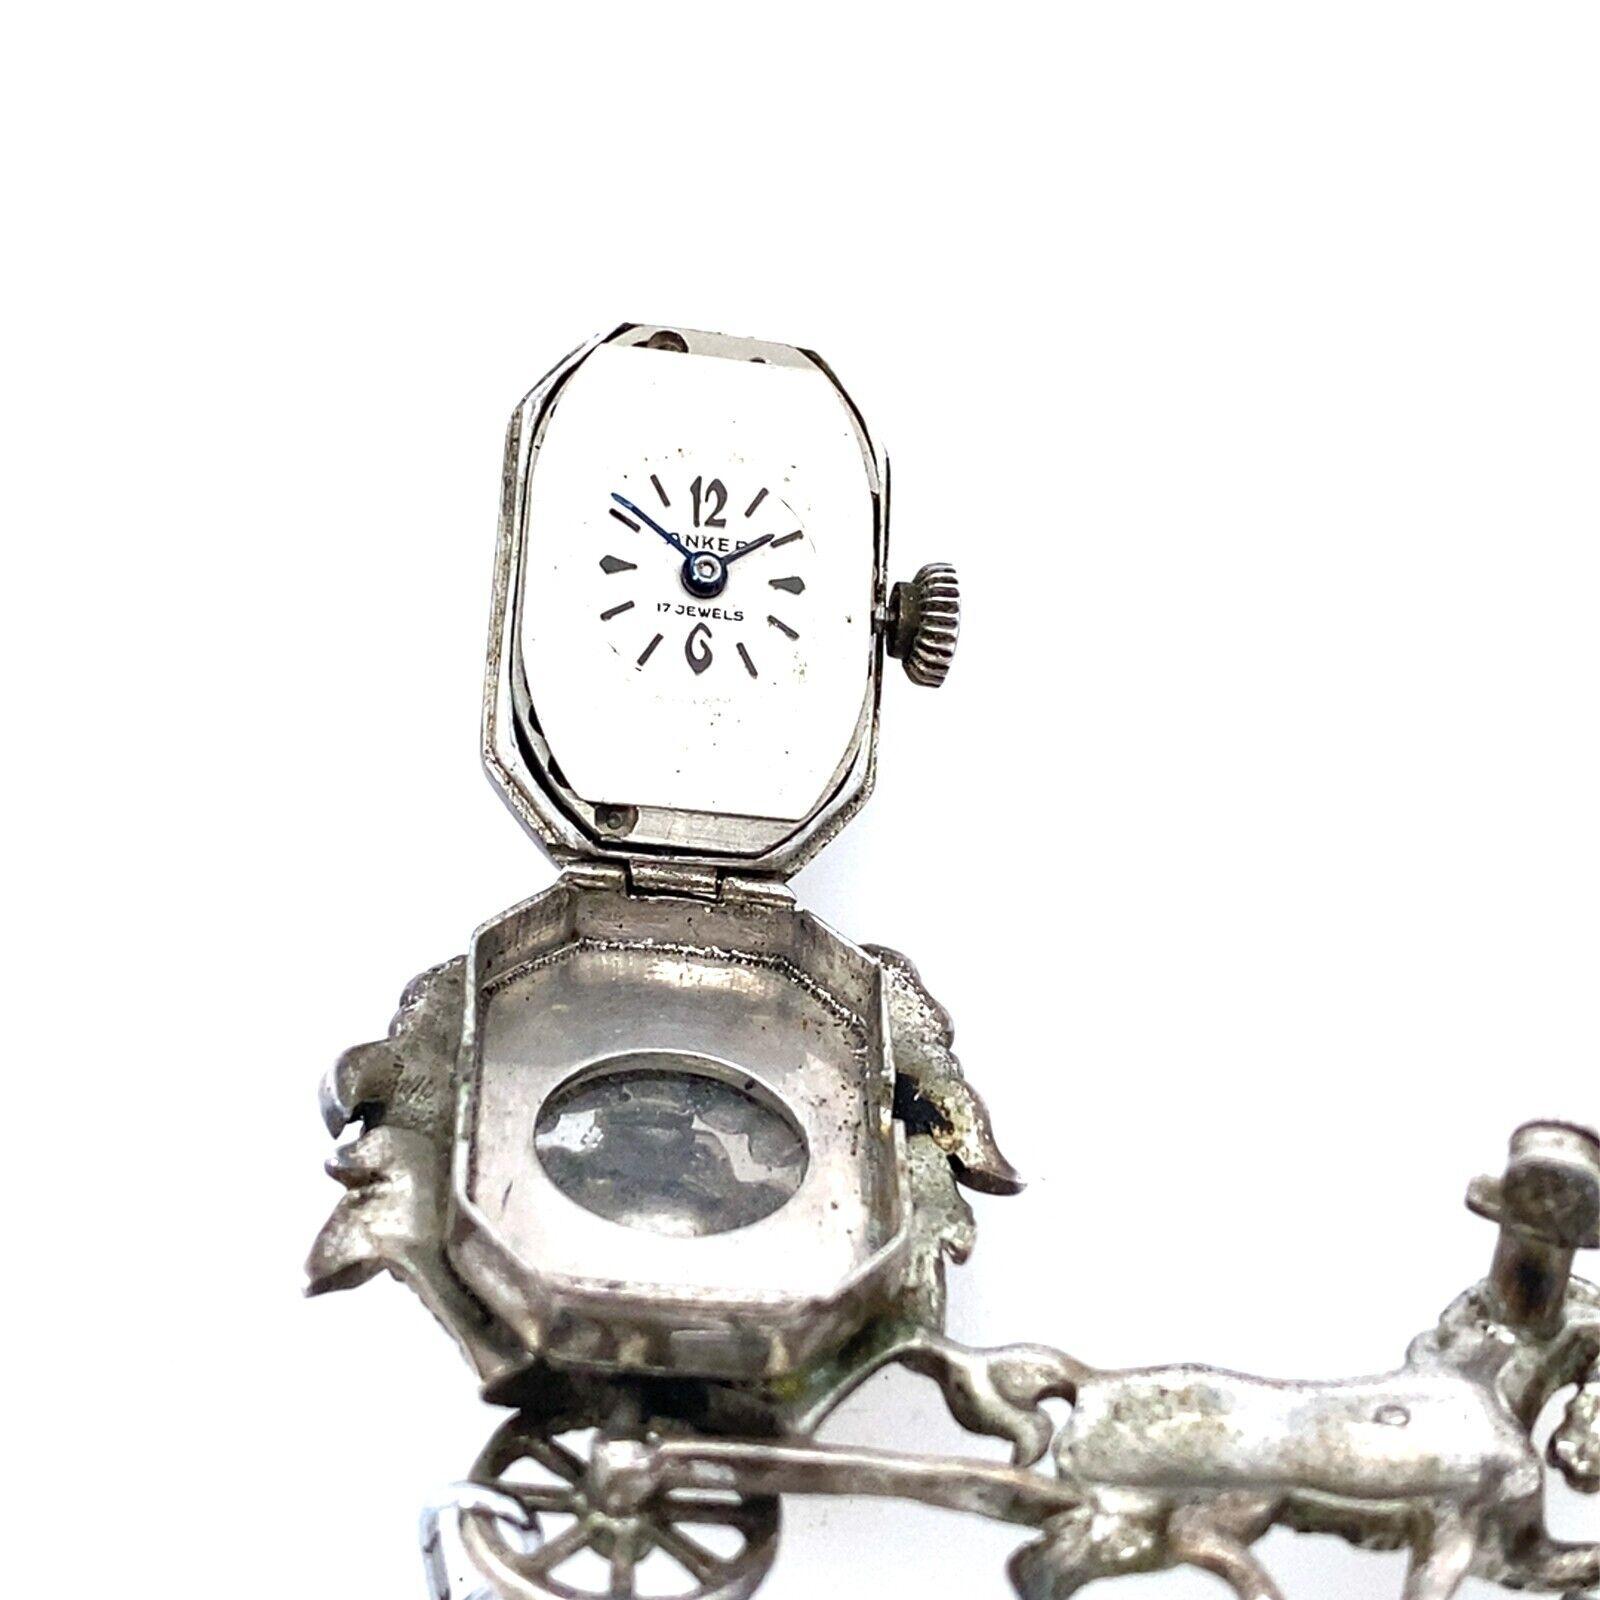 This Anker Silver 1950's Horse and Carriage Monarch Brooch/Watch with Marcasite is a vintage piece that is in very good condition, with safety chain. It has the original Anker on the back and is in full working condition.

Additional Information: